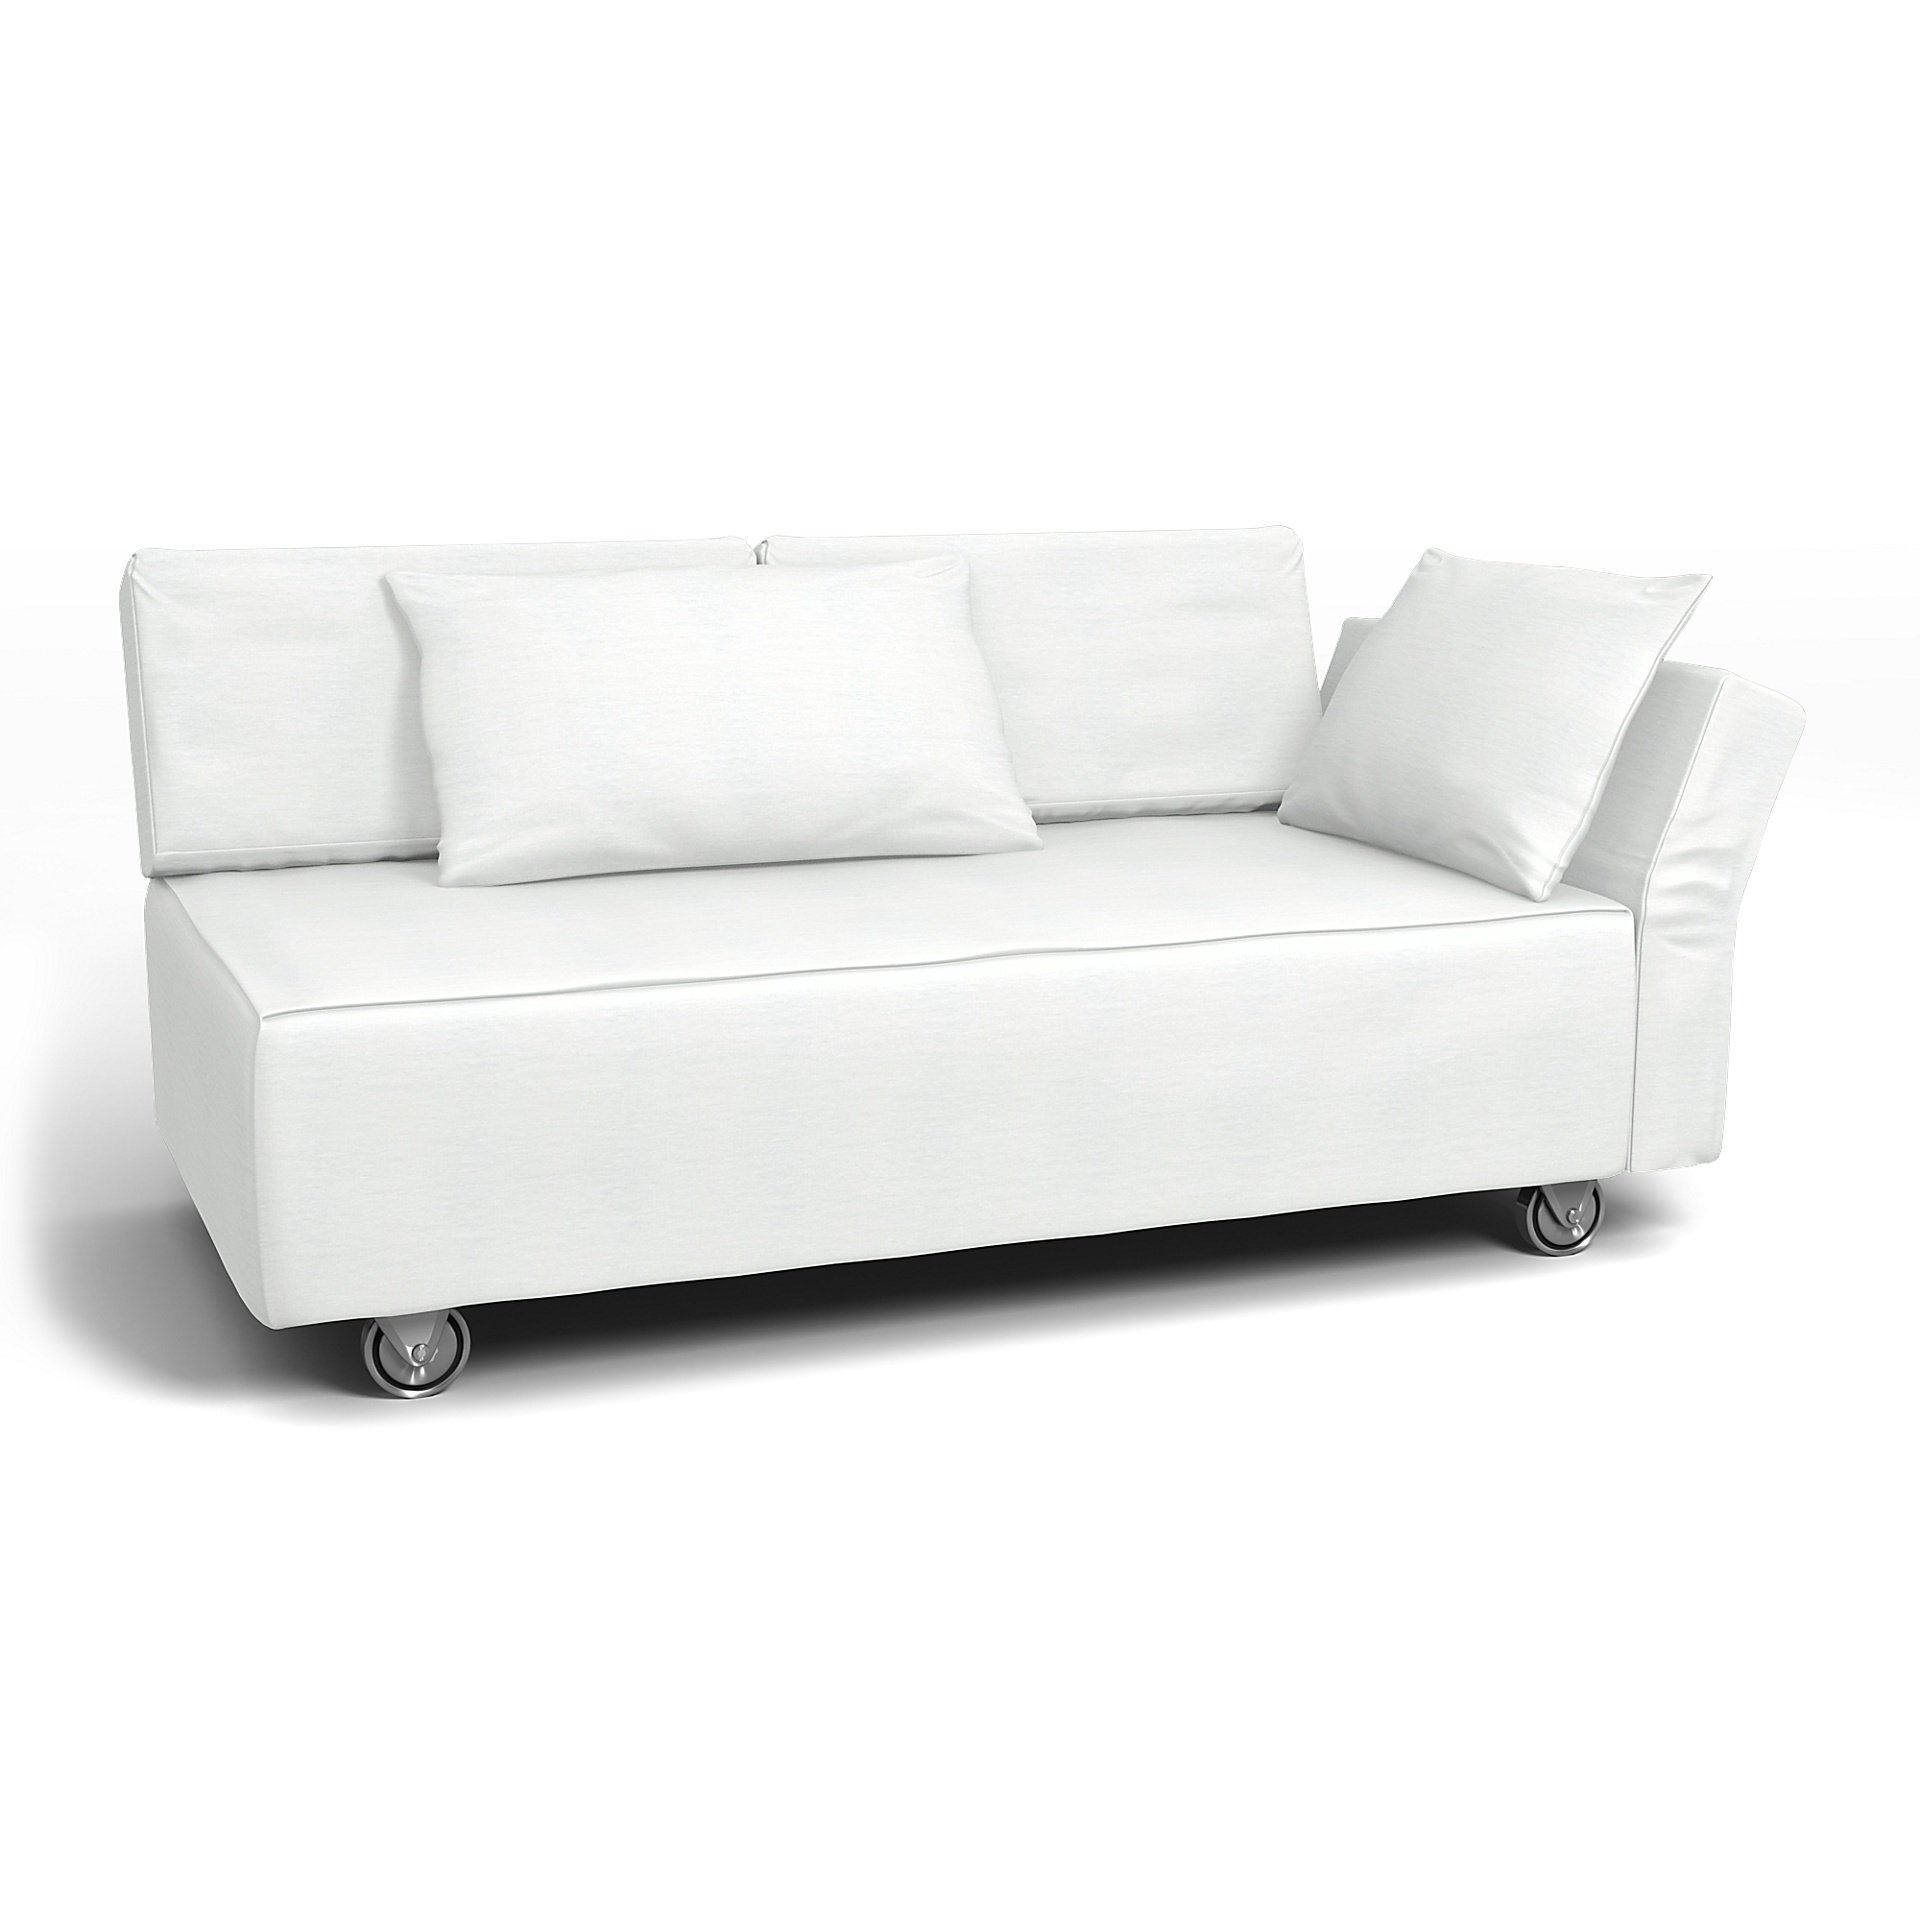 IKEA - Falsterbo 2 Seat Sofa with Right Arm Cover, White, Linen - Bemz